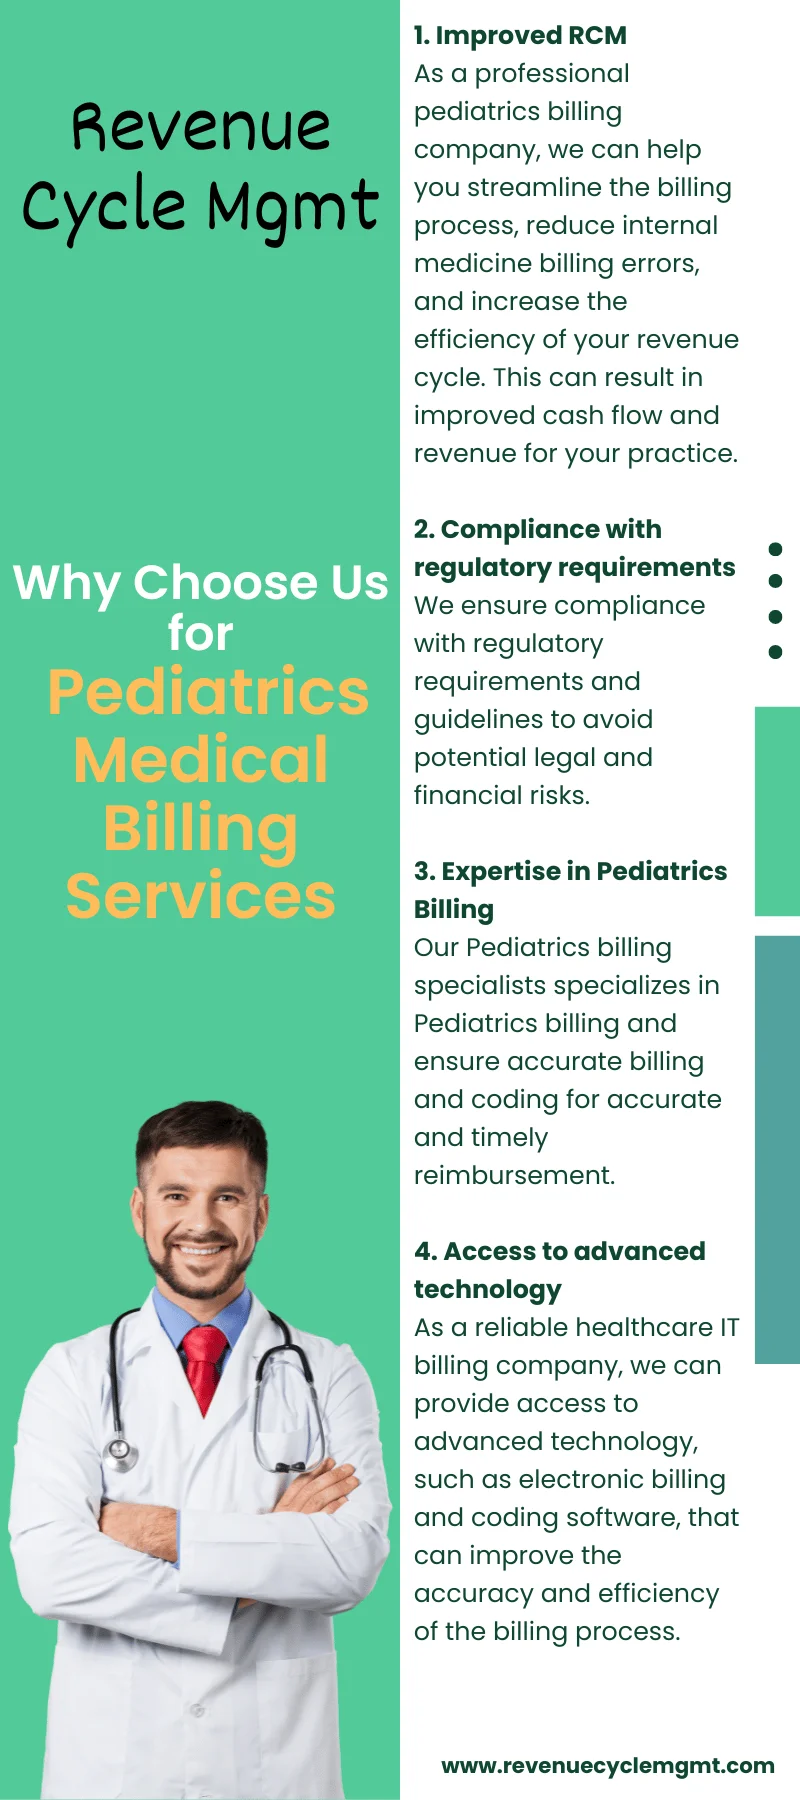 Why Choose Us for Pediatrics Medical Billing Services